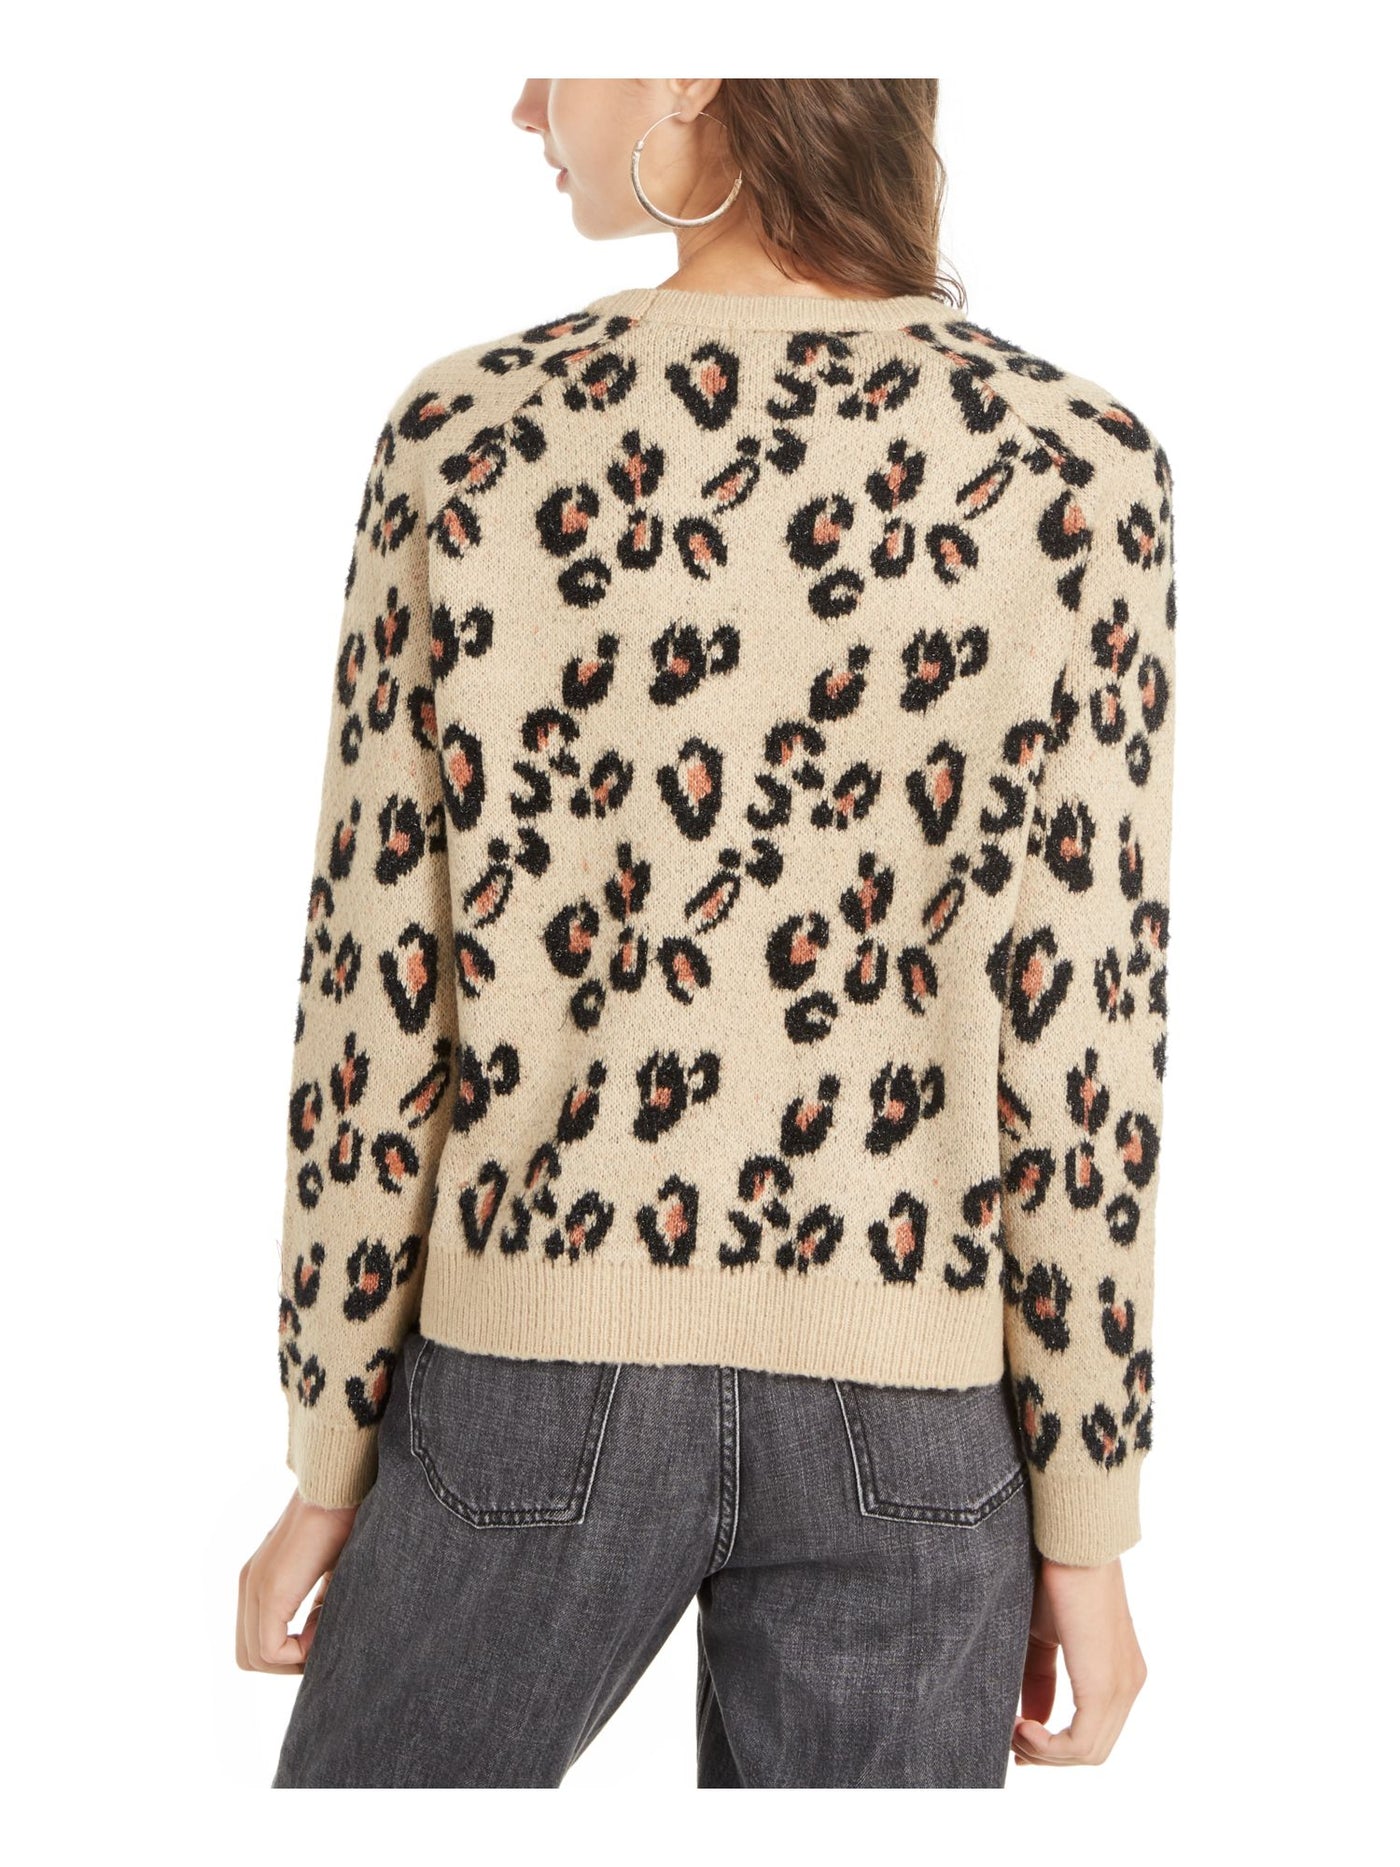 PLANET GOLD Womens Brown Textured Animal Print Long Sleeve Crew Neck Sweater Juniors L